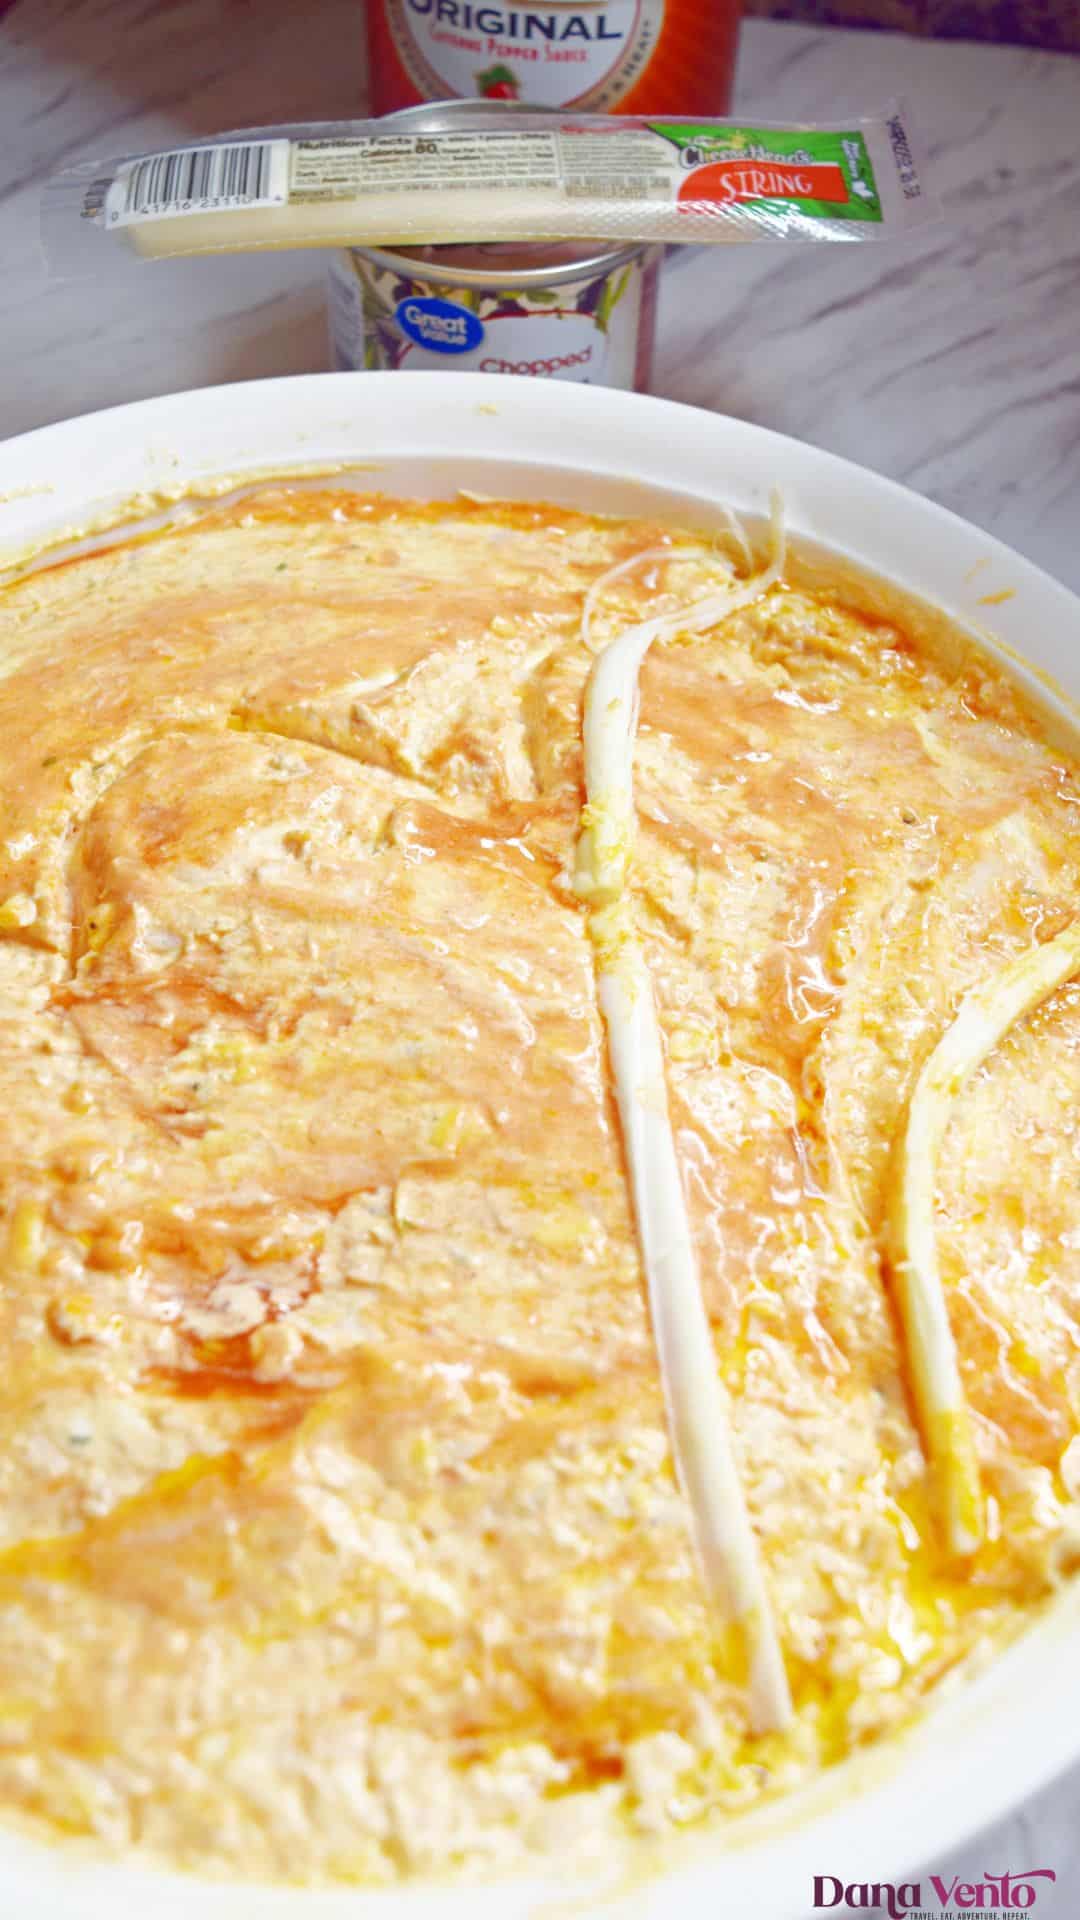 How To Make A Spider Web On Your Buffalo Chicken Dip